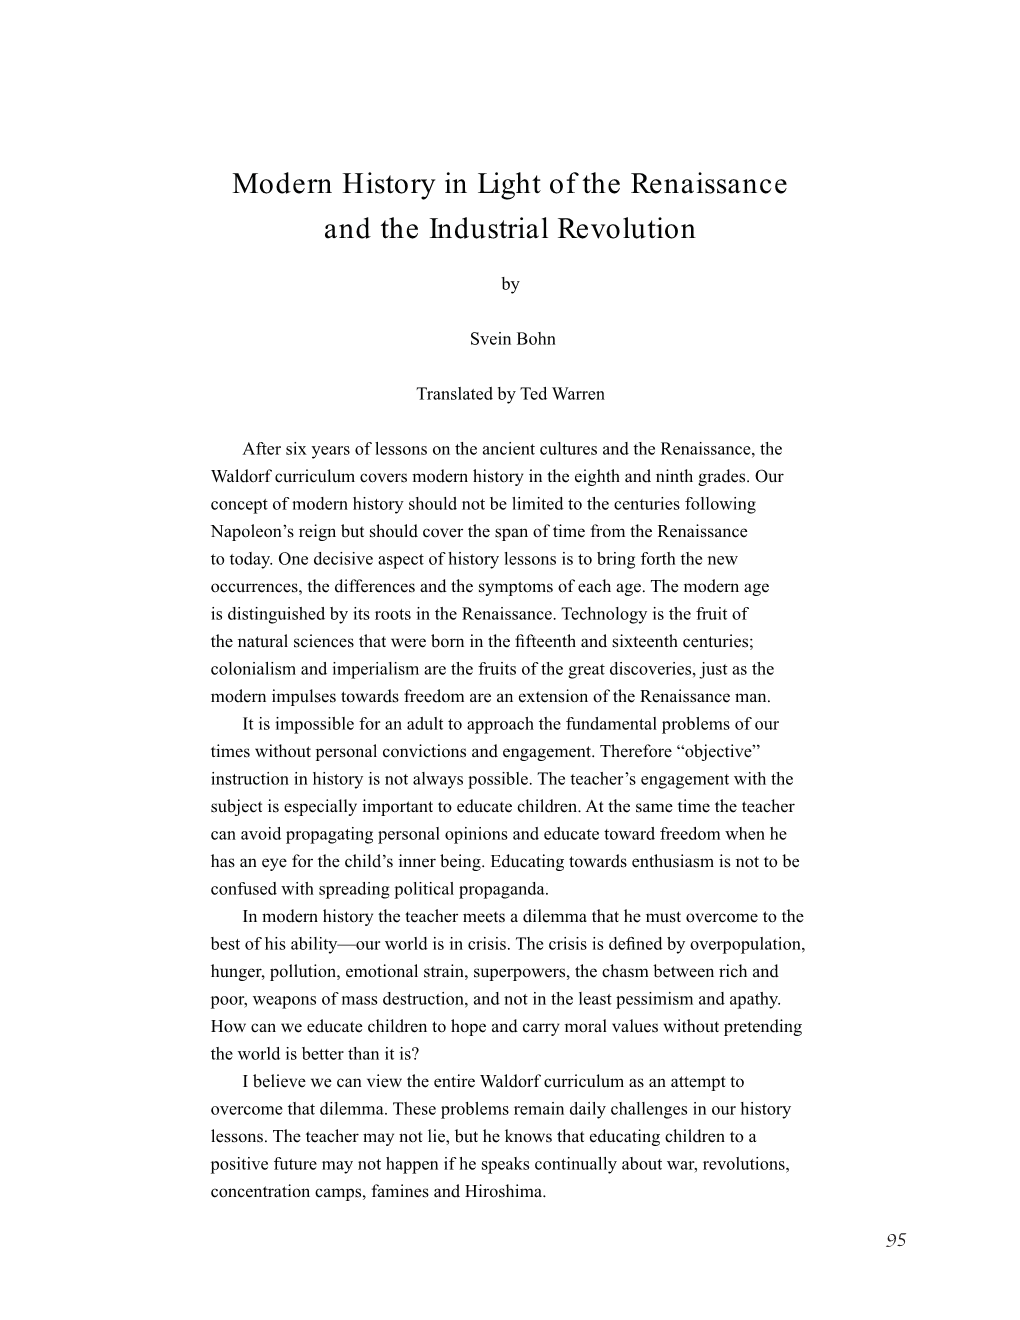 Modern History in Light of the Renaissance and the Industrial Revolution